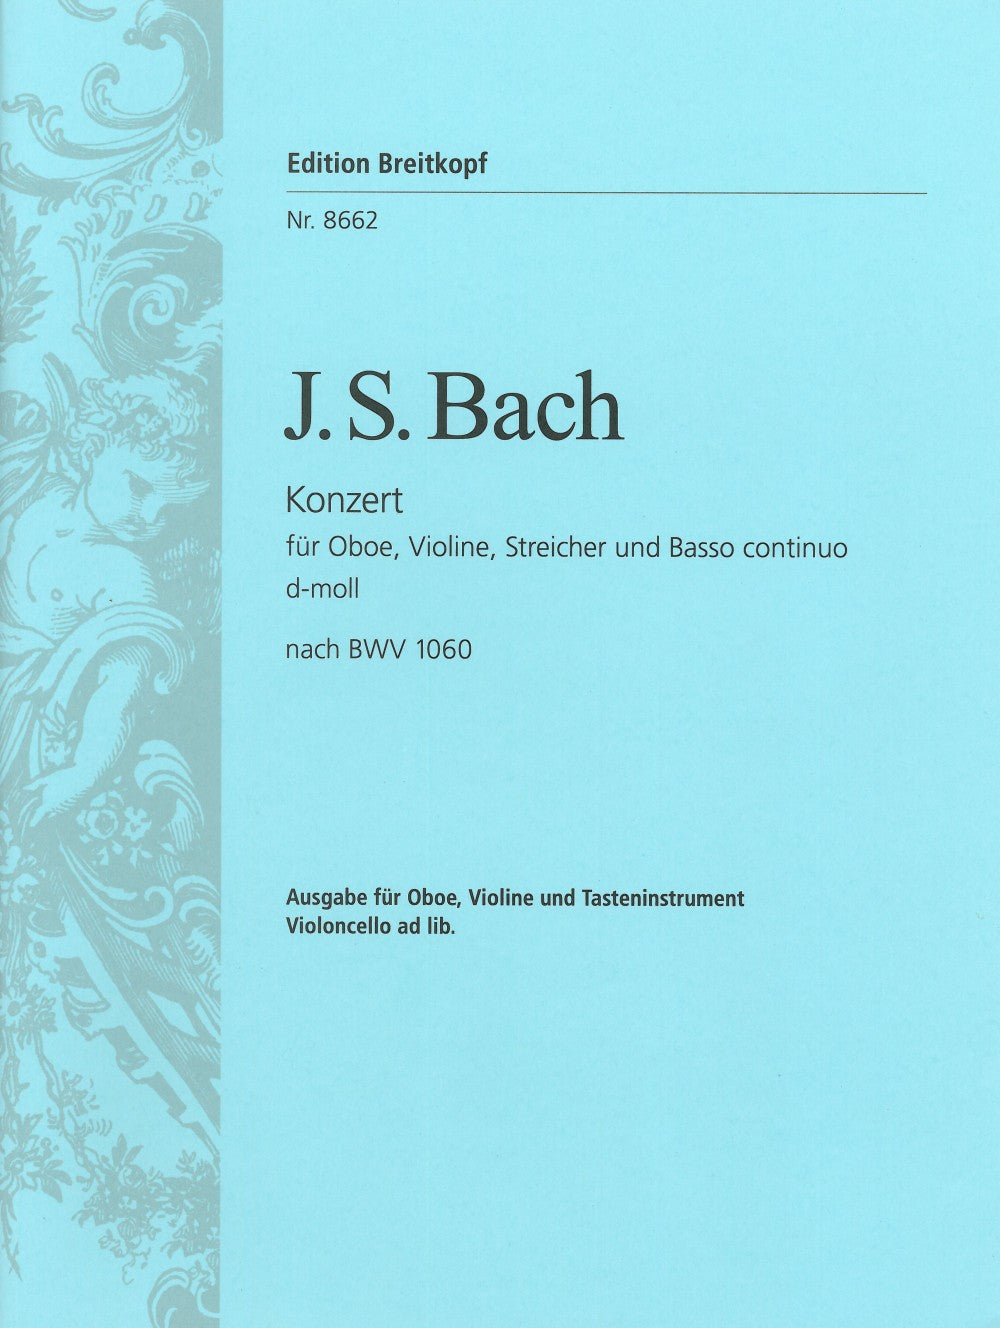 Bach Double Concerto in D minor Reconstruction based on BWV 1060